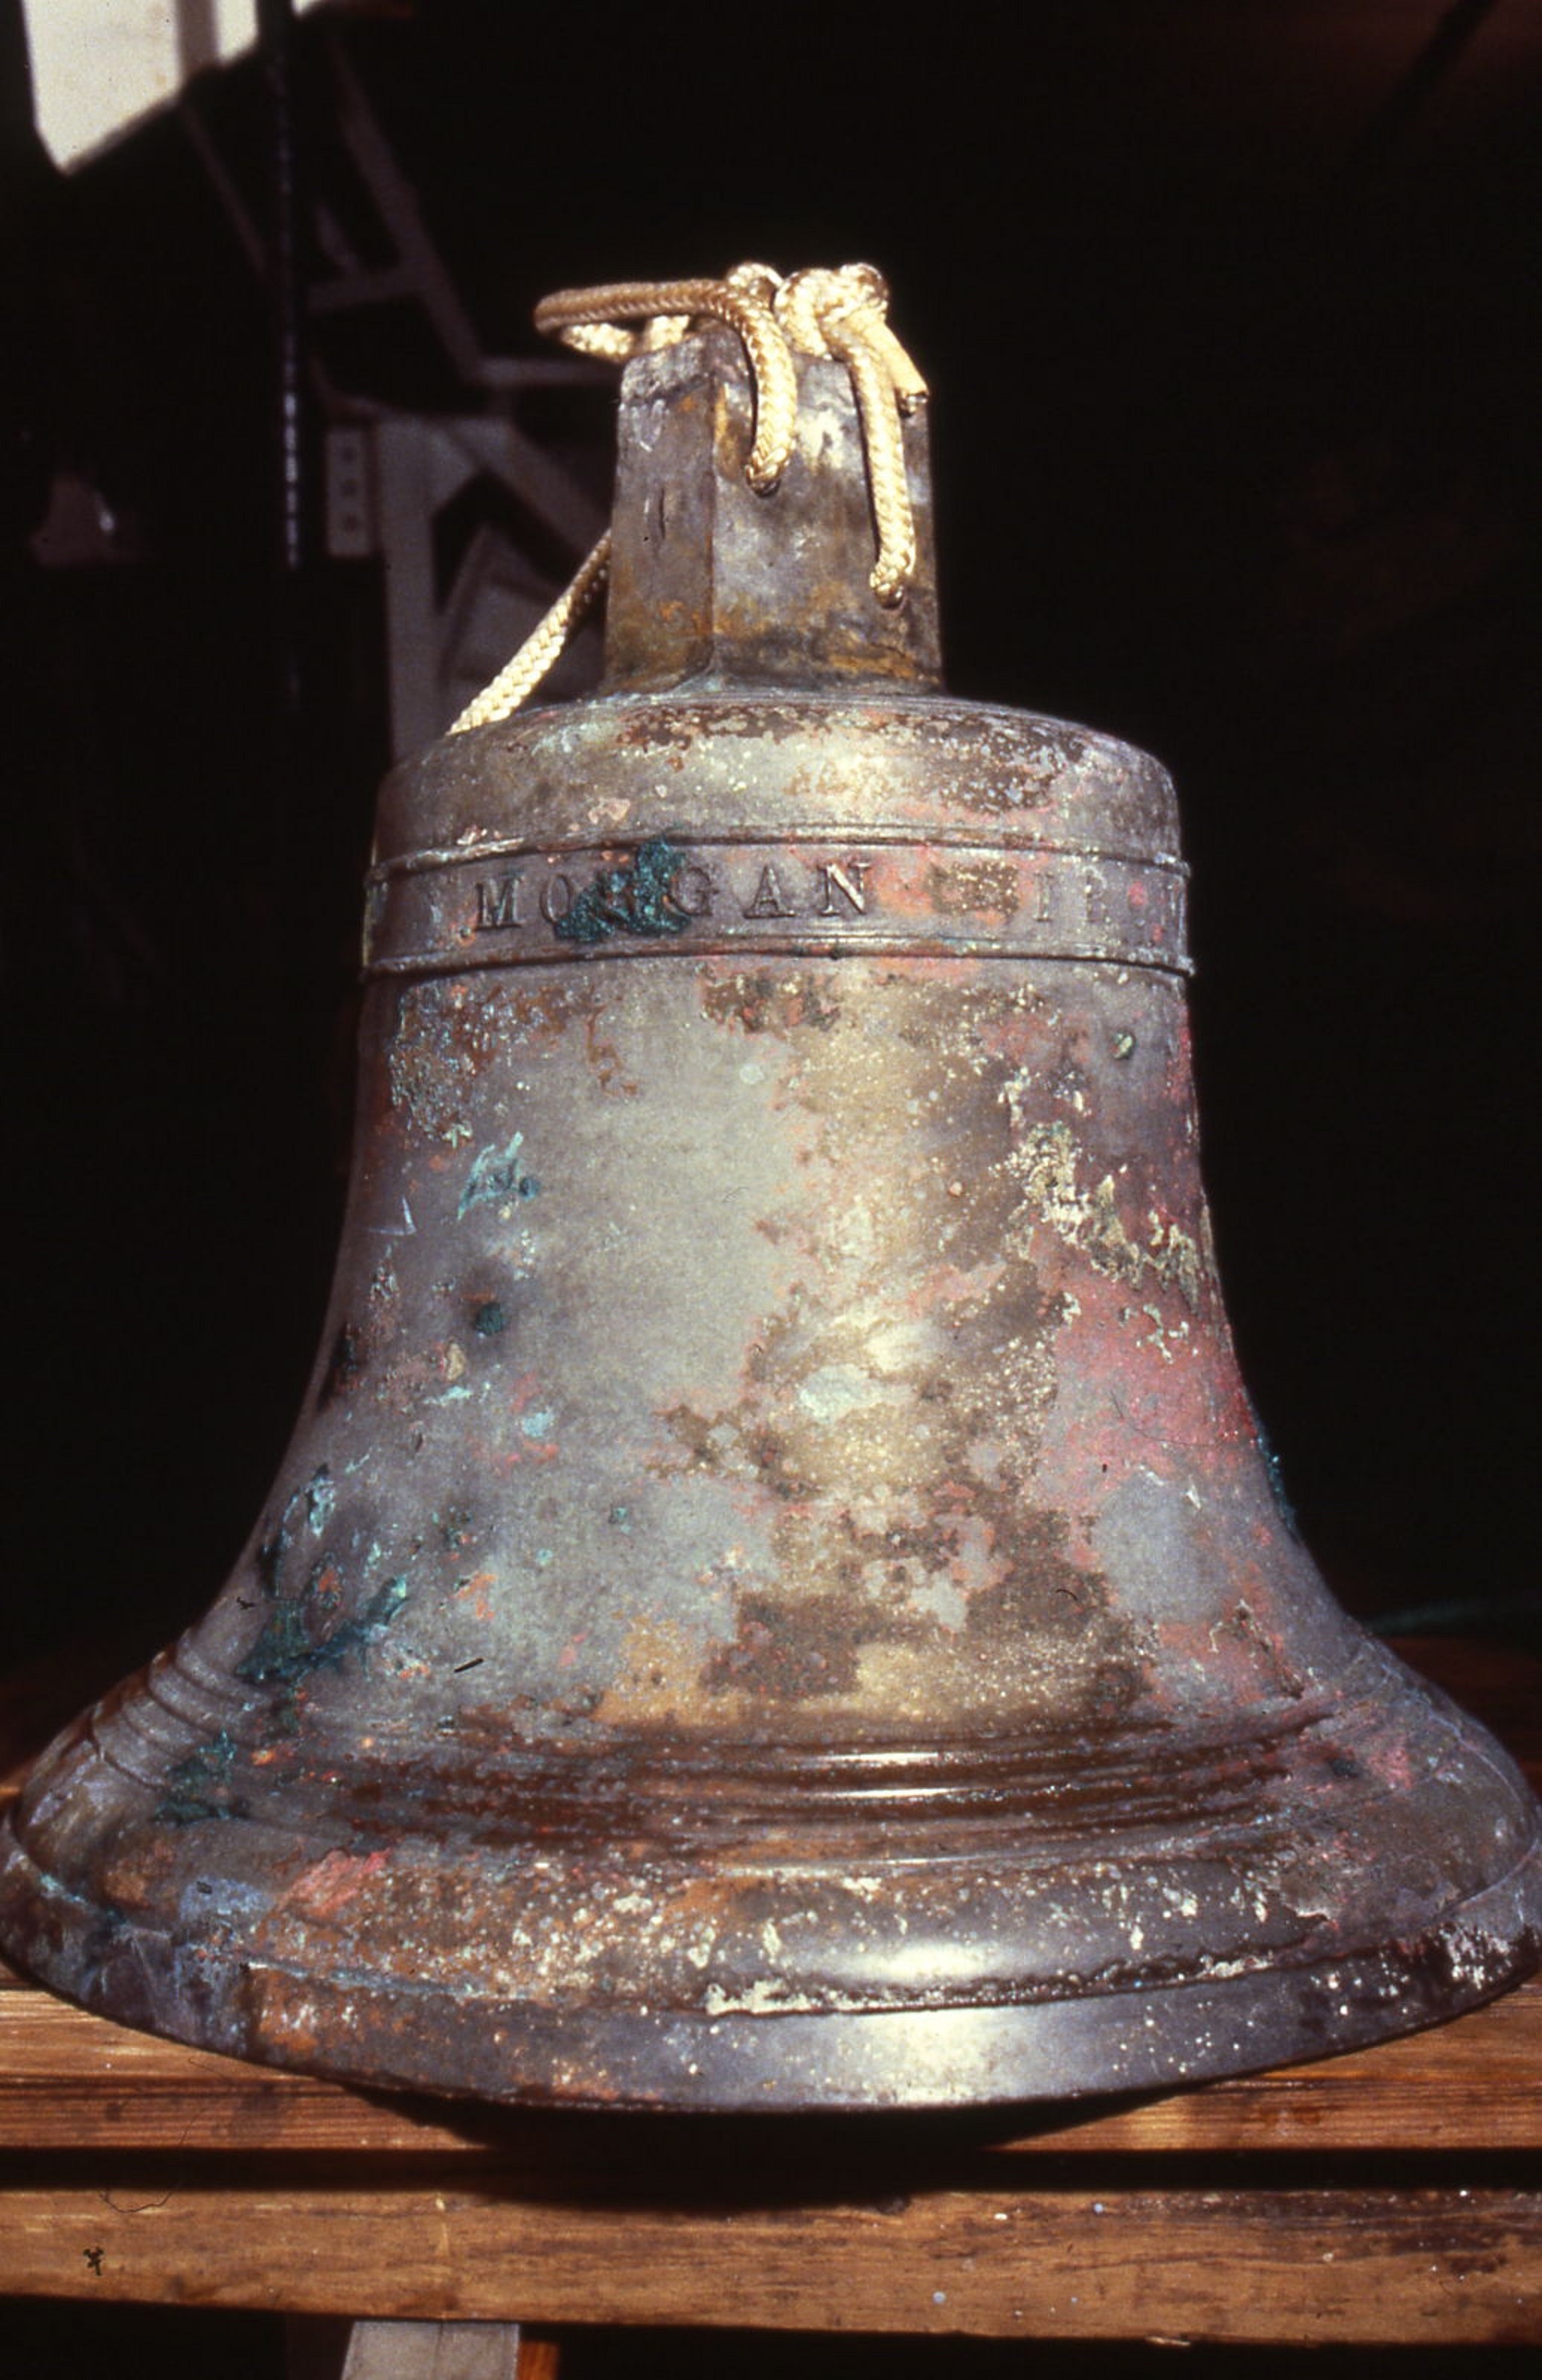 SS Central America Bell.